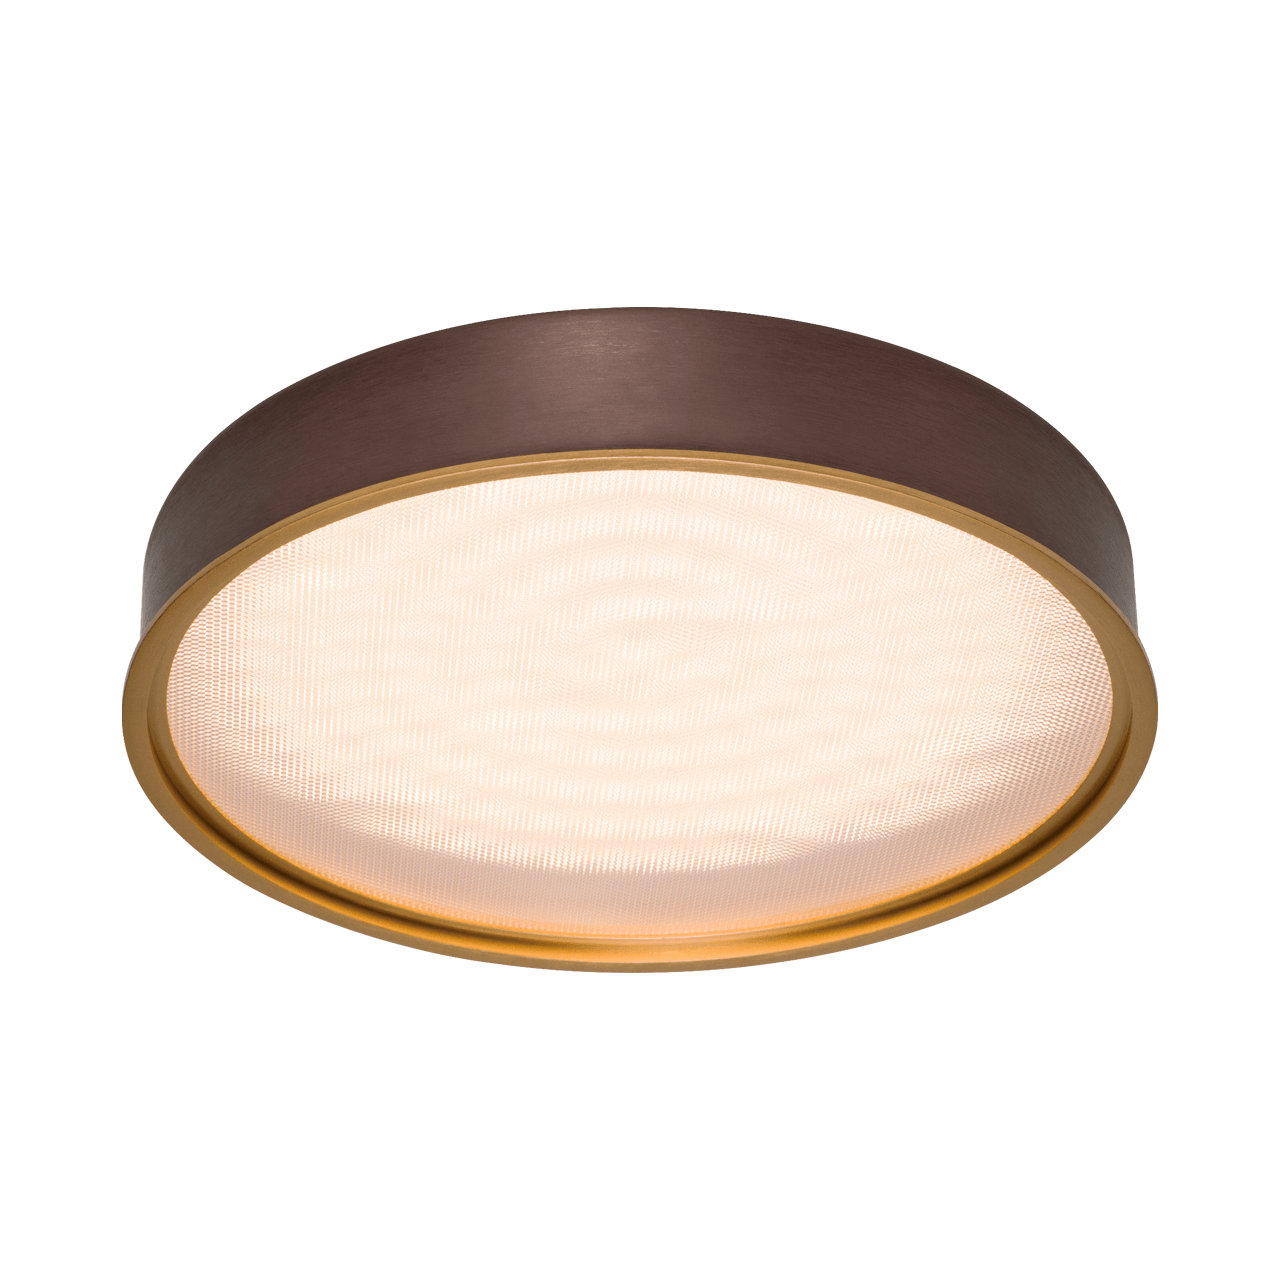 Pageone - Pan (Round S) 12". Ceiling. Flush Mount - Hbdepot